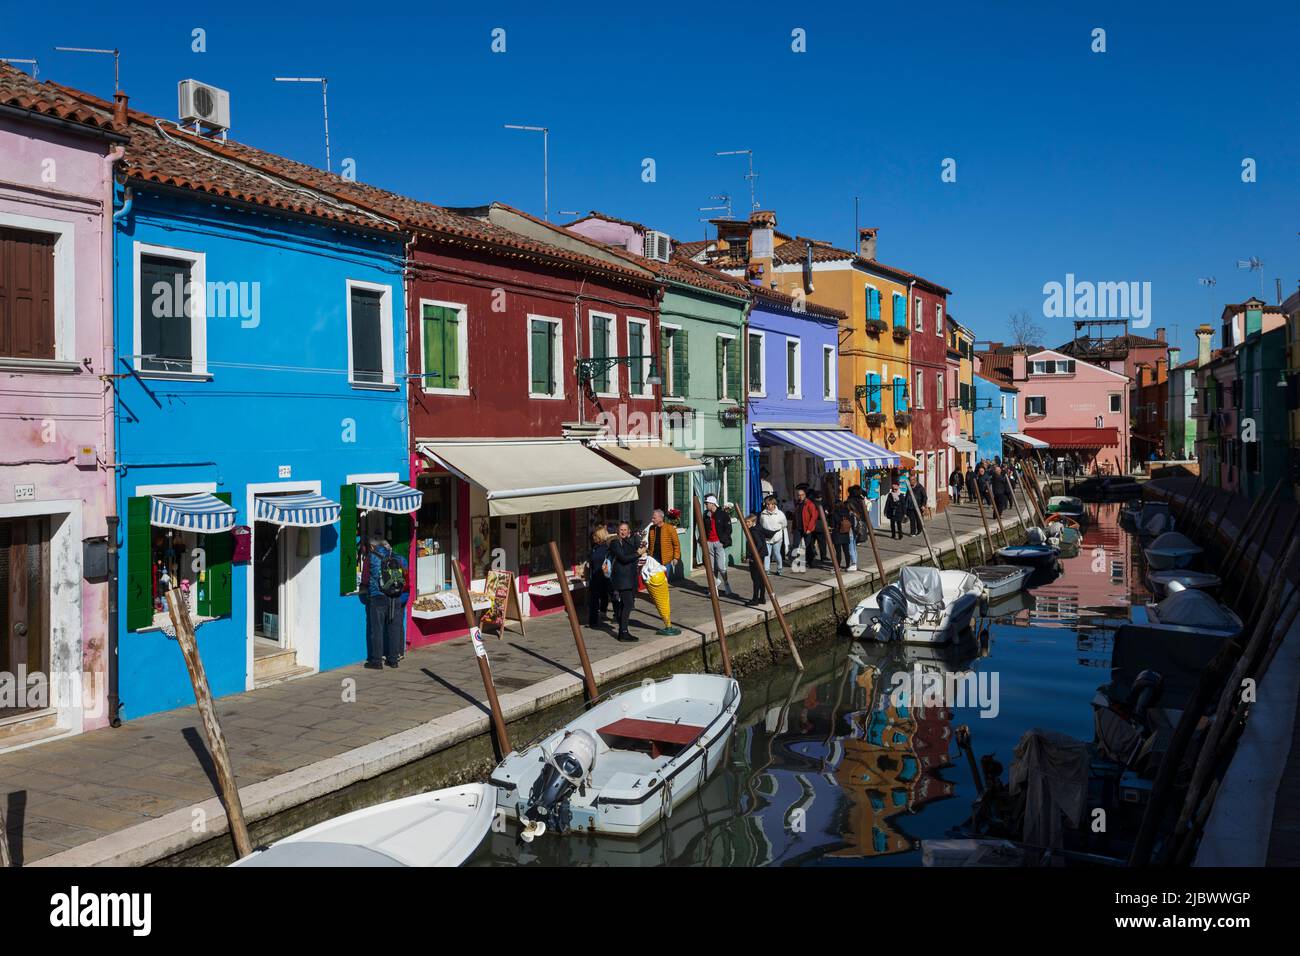 Colourful houses in Burano, Venice, Italy, Europe Stock Photo